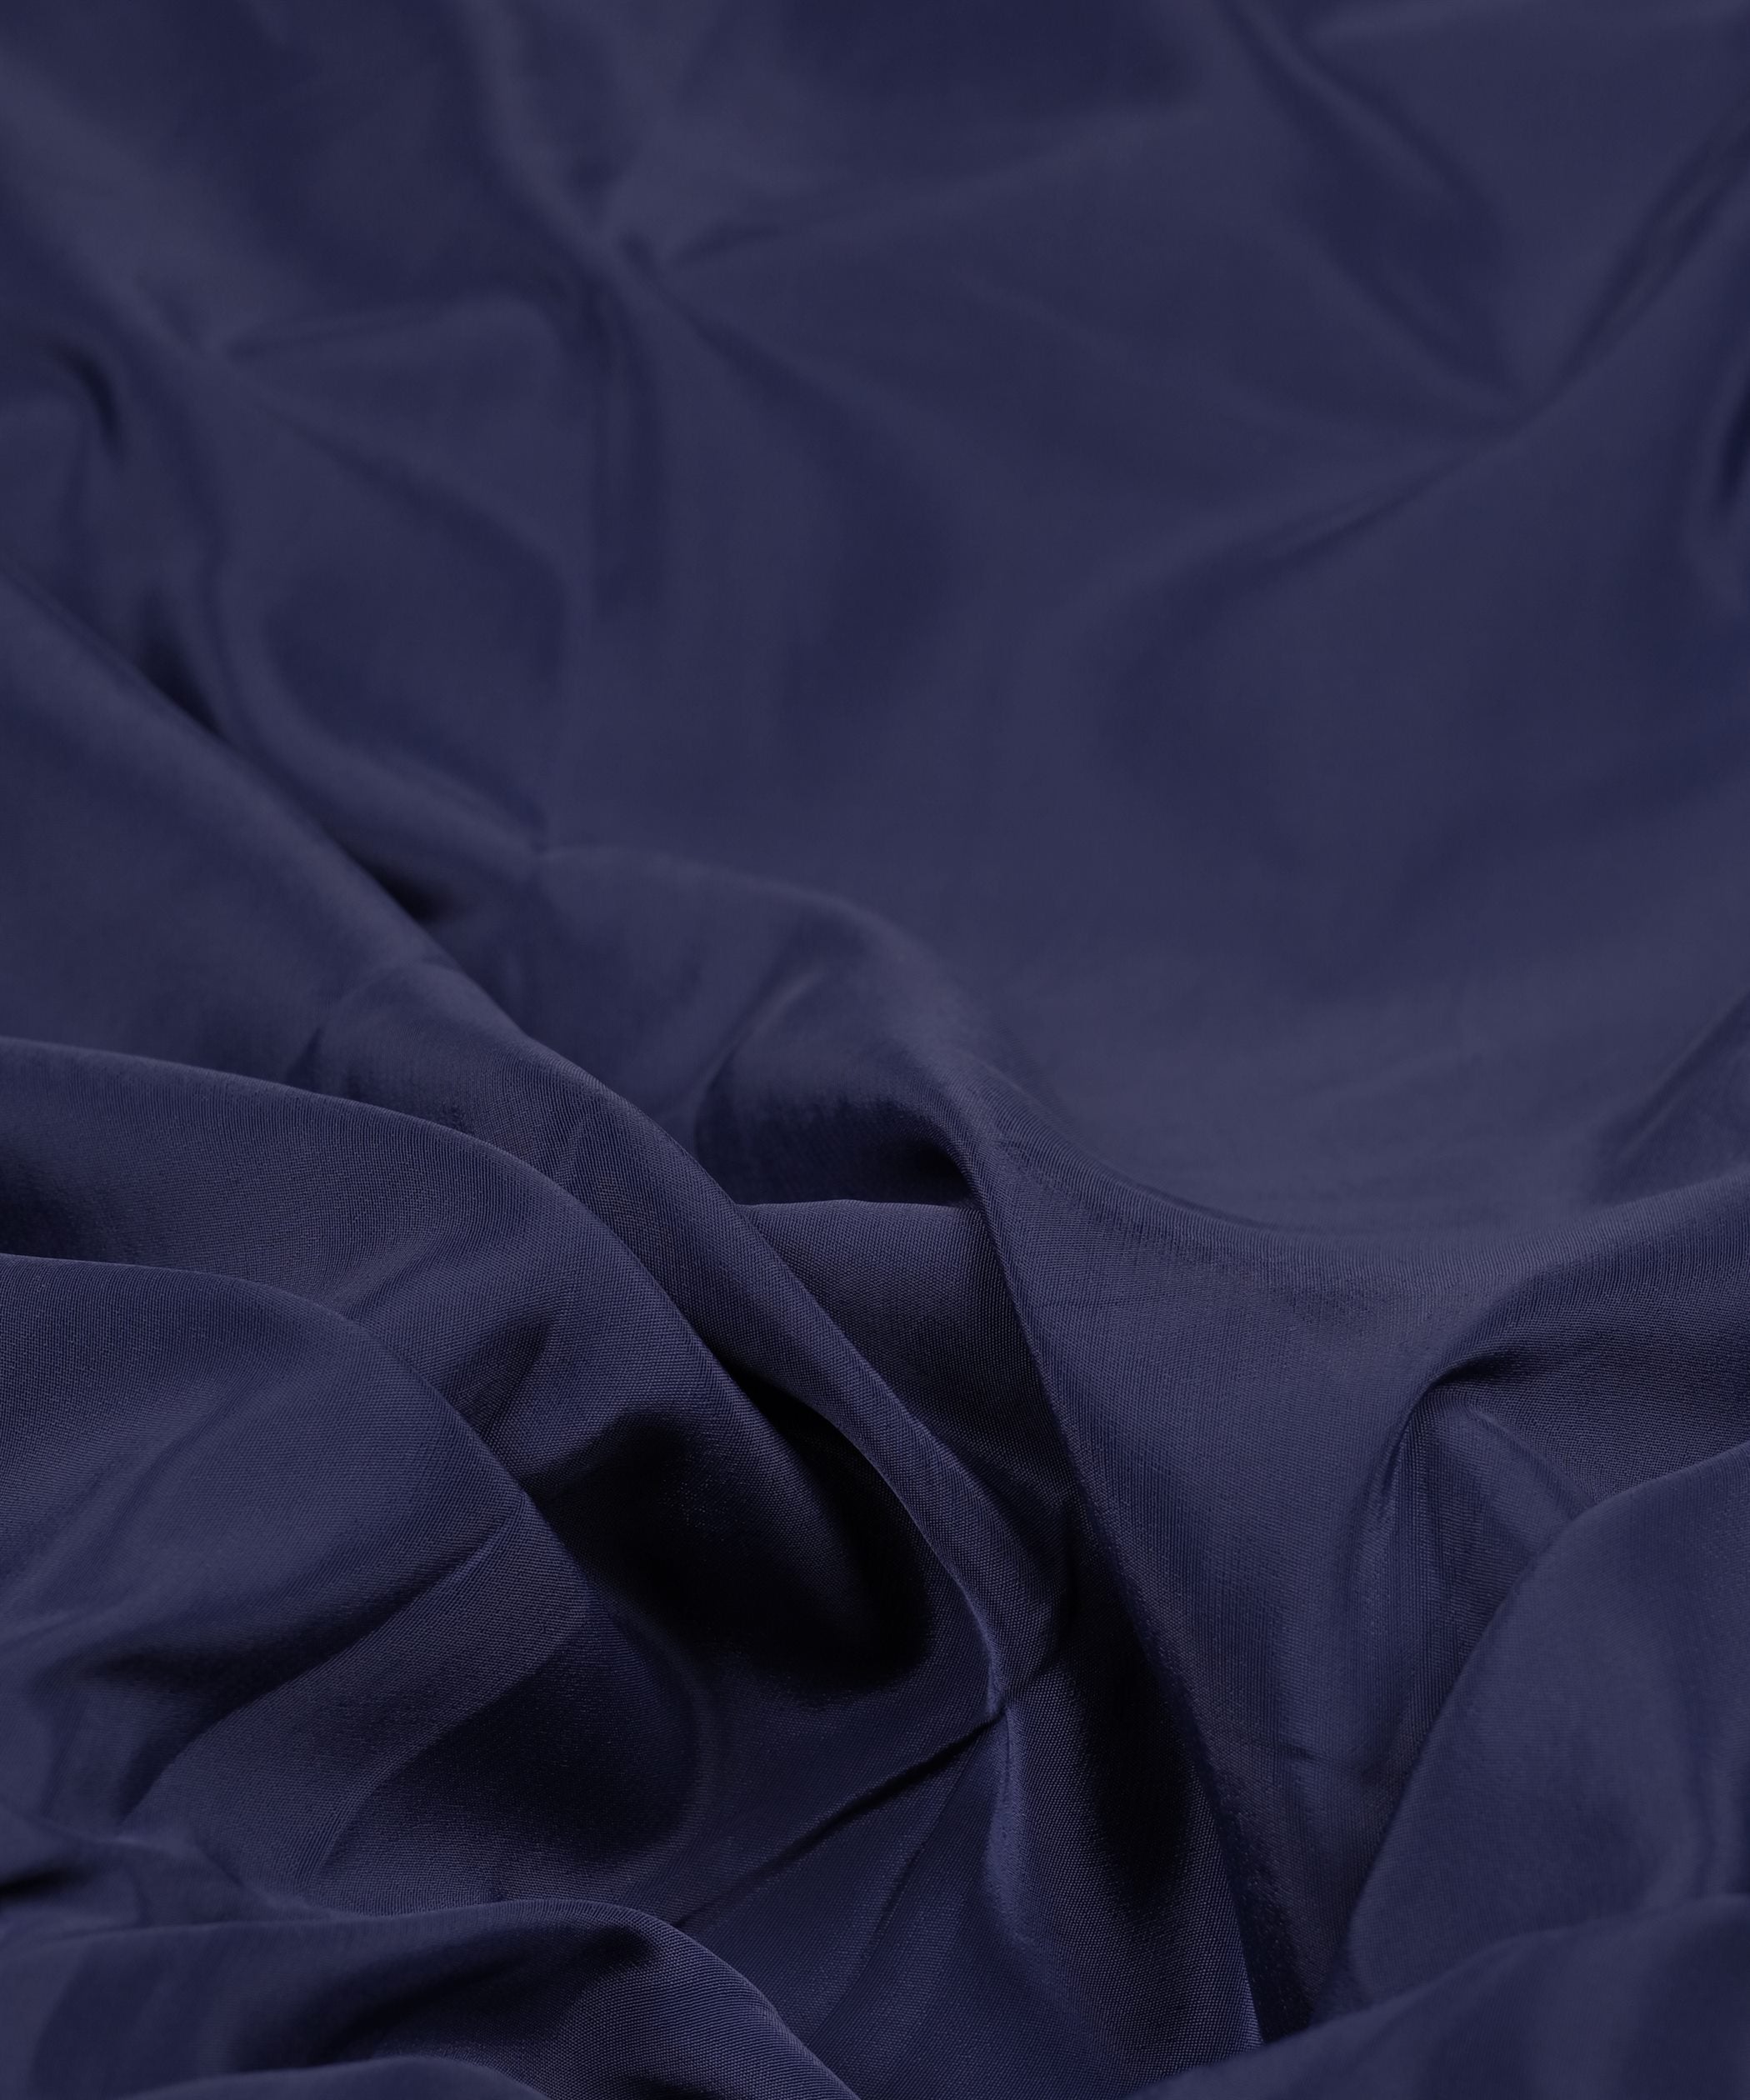 Navy Blue Plain Dyed American Crepe Fabric